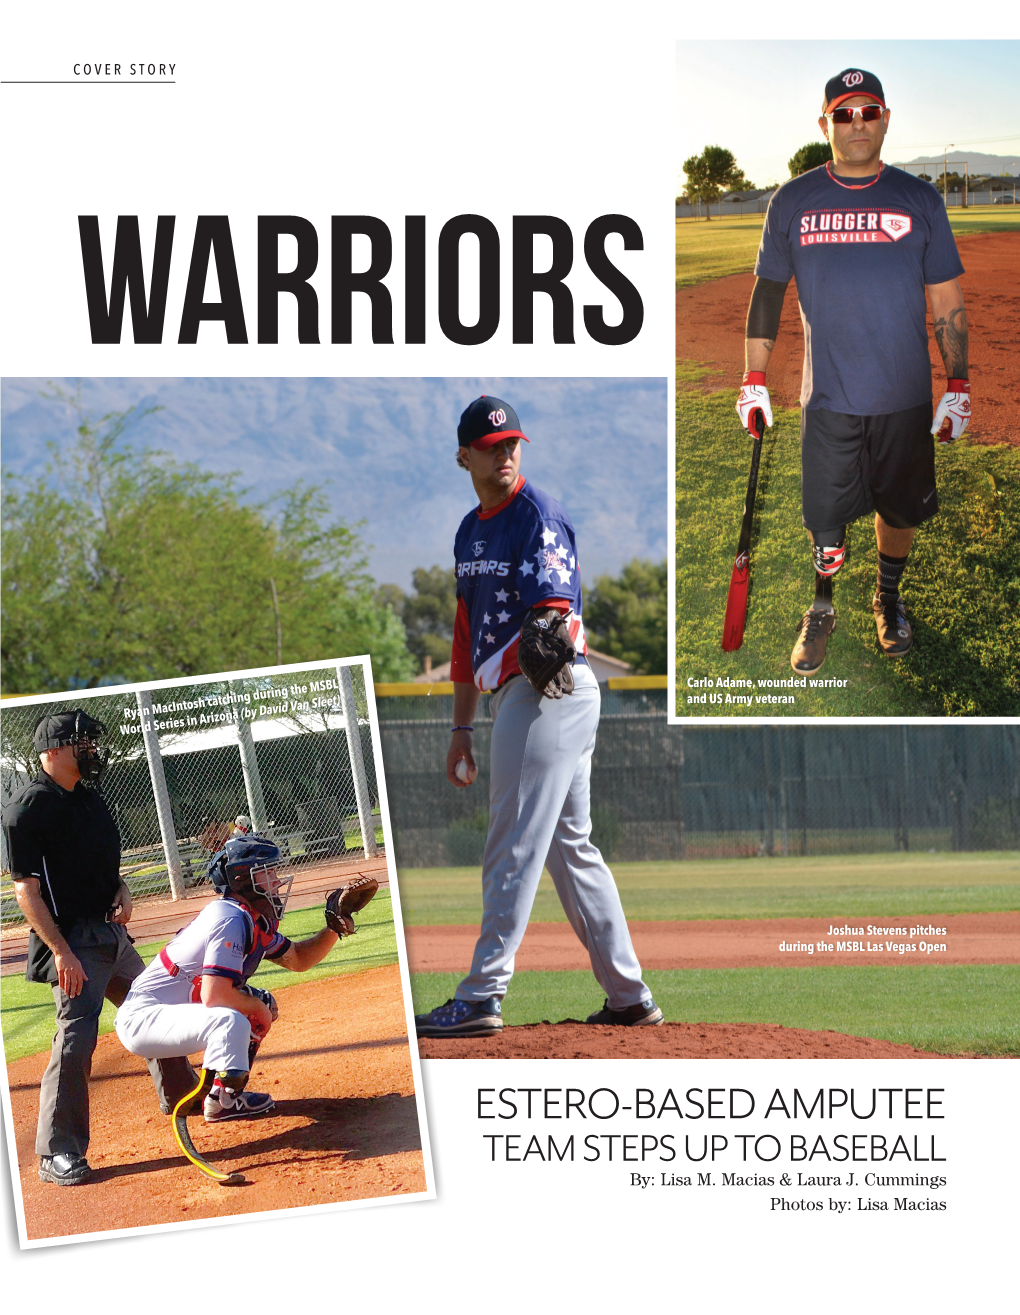 ESTERO-BASED AMPUTEE TEAM STEPS up to BASEBALL By: Lisa M